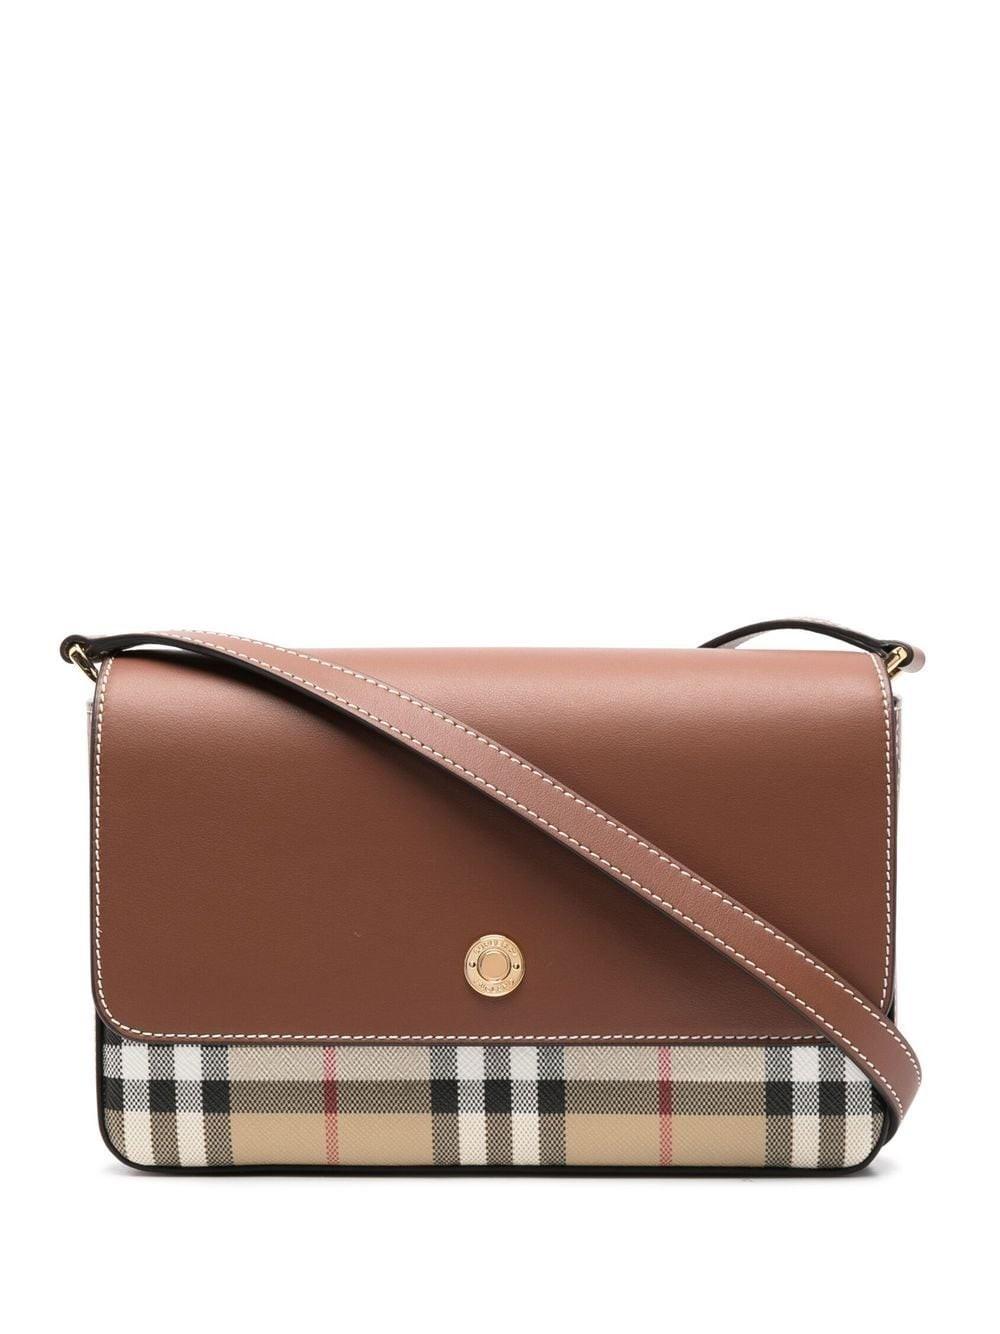 Burberry New Hampshire Vintage Check Canvas & Leather Crossbody